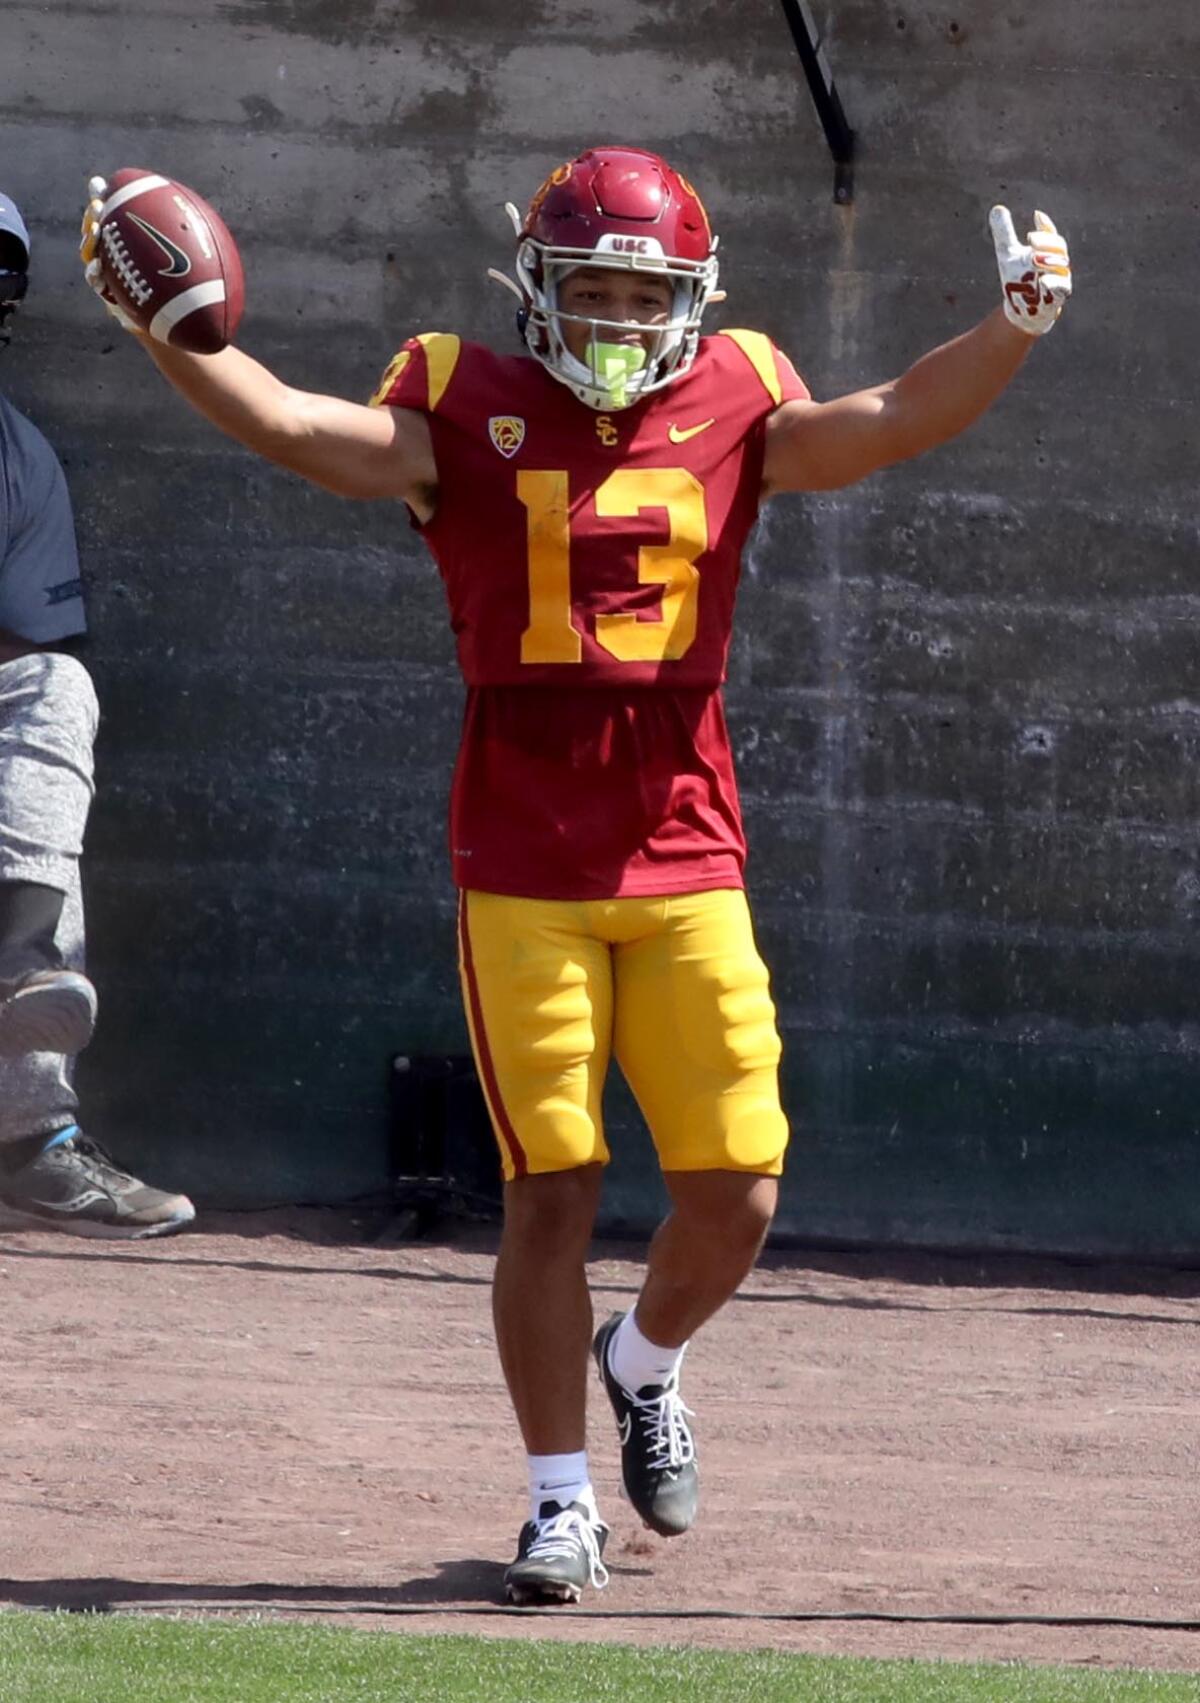 USC wide receiver Michael Jackson celebrates a touchdown during the spring game April 17, 2021.